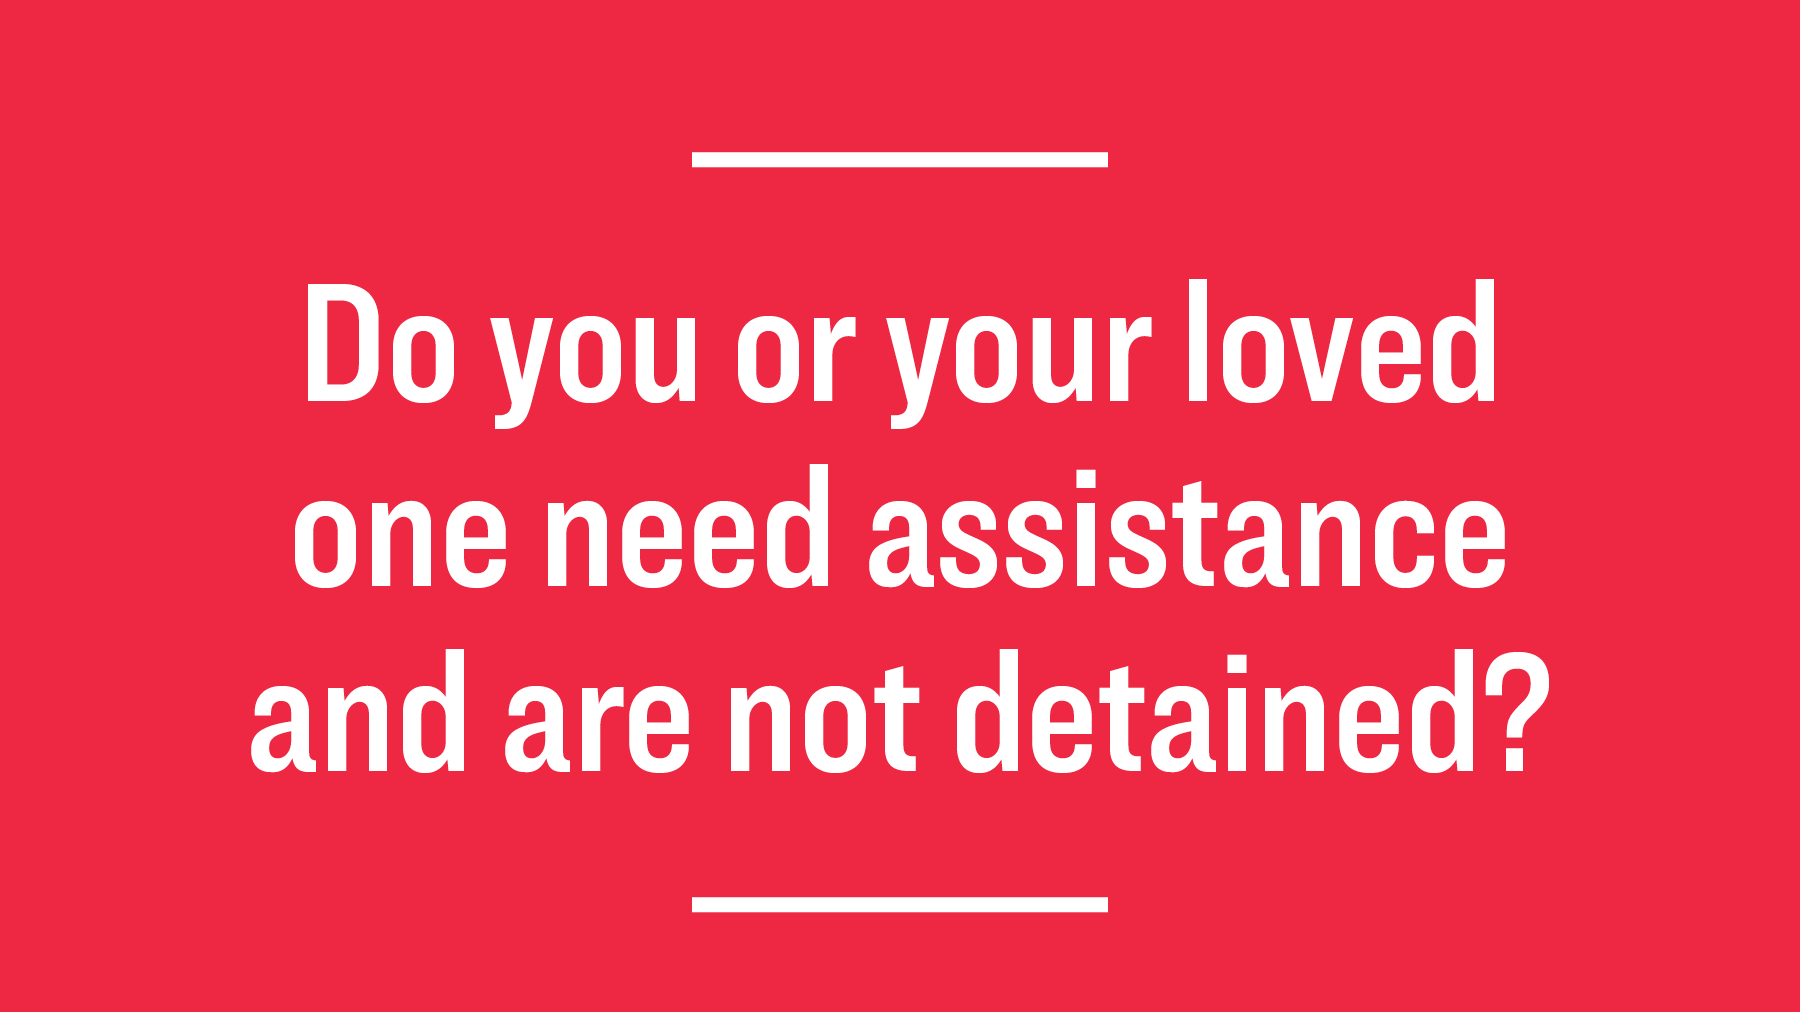 Do you or your loved one need assistance and are not detained?